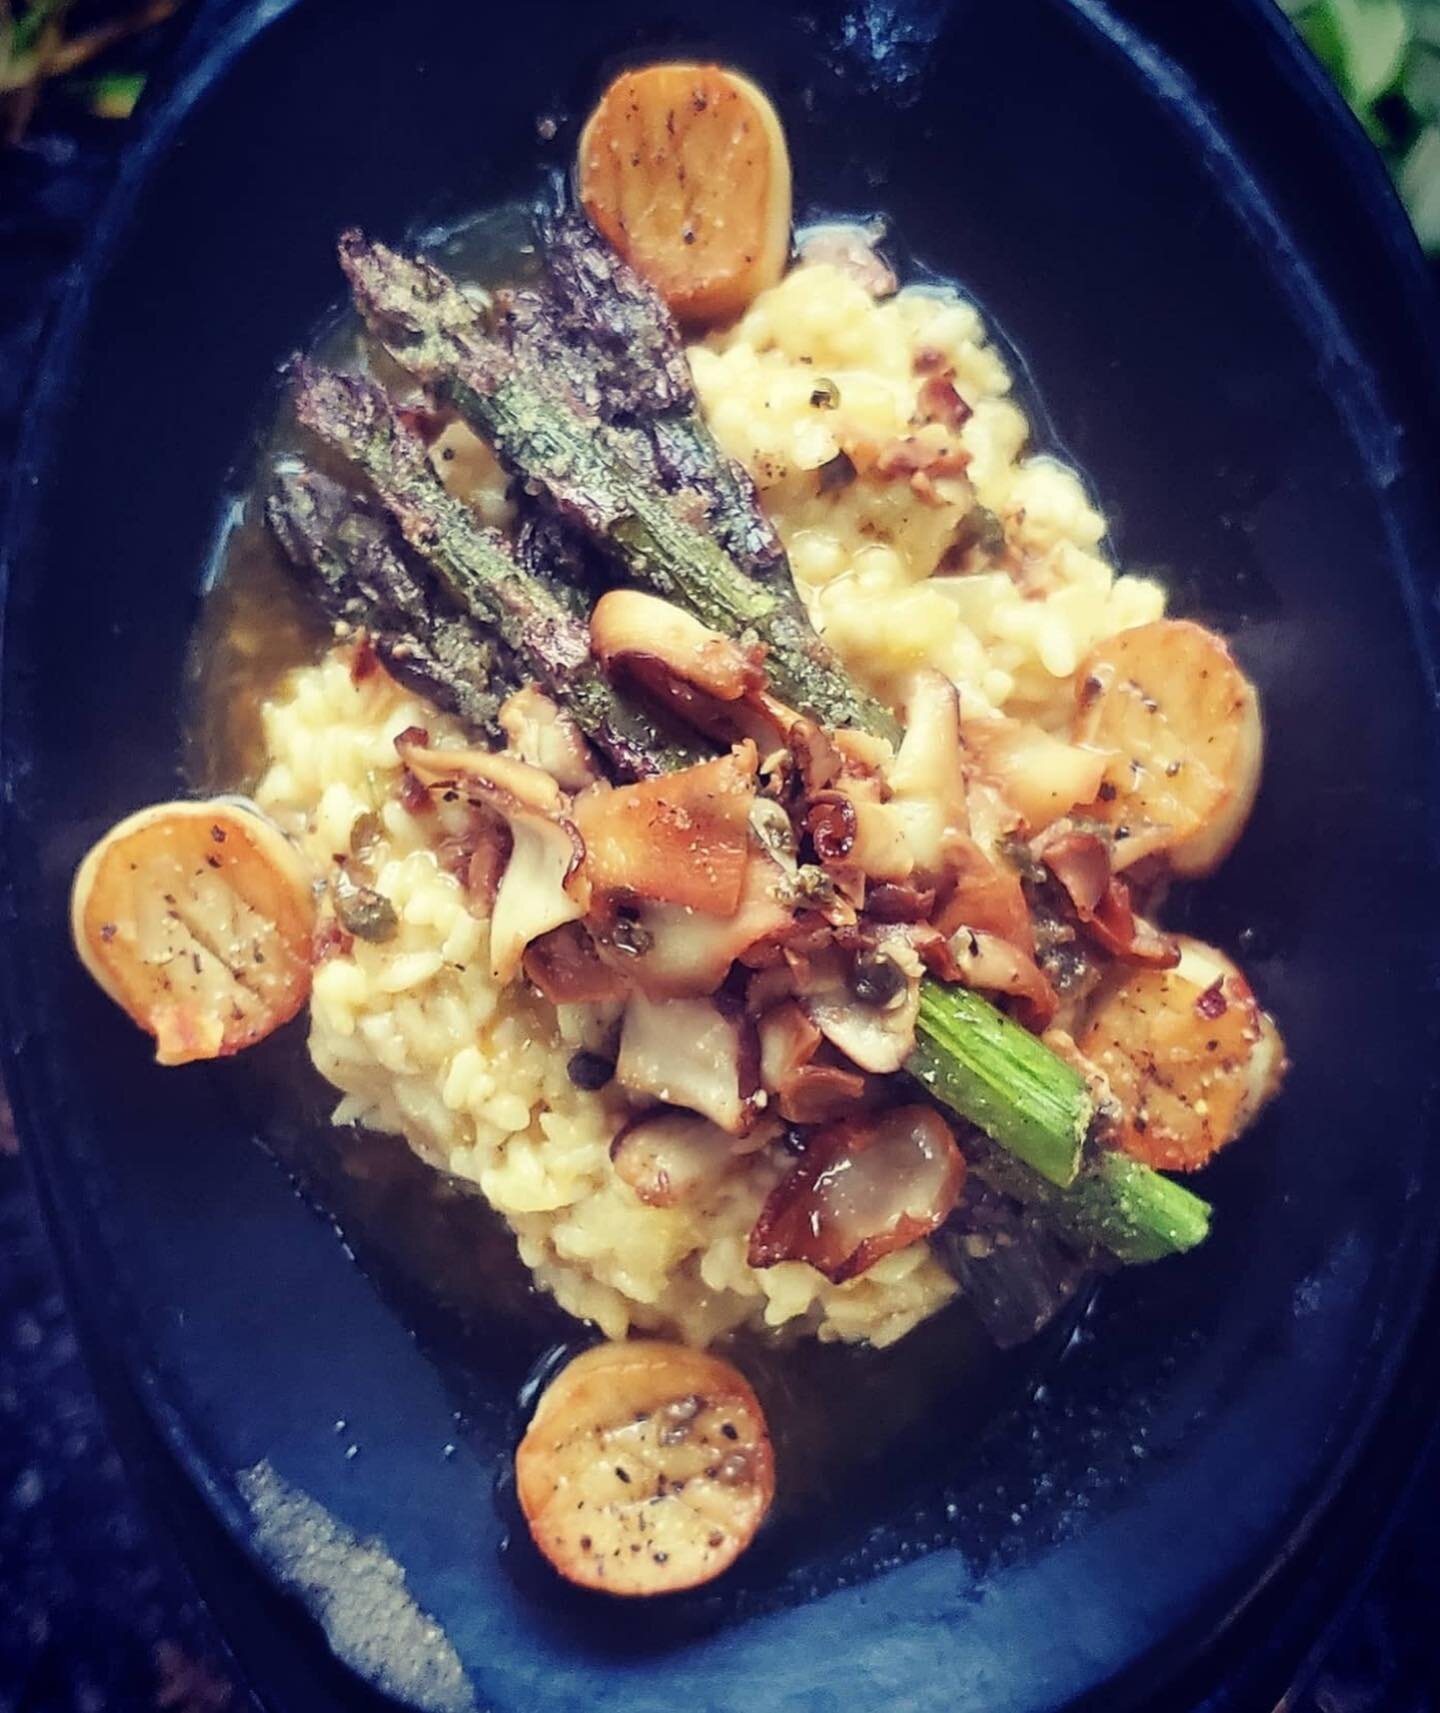 Scallops &amp; Risotto featured by chef Breck Oxford @insatiablevegan
🌱
Breck a traveling private chef for the stars &amp; everyday people, spreading love by way of housemade plantbased cuisine. Everything is made with love, intention &amp; lots of 